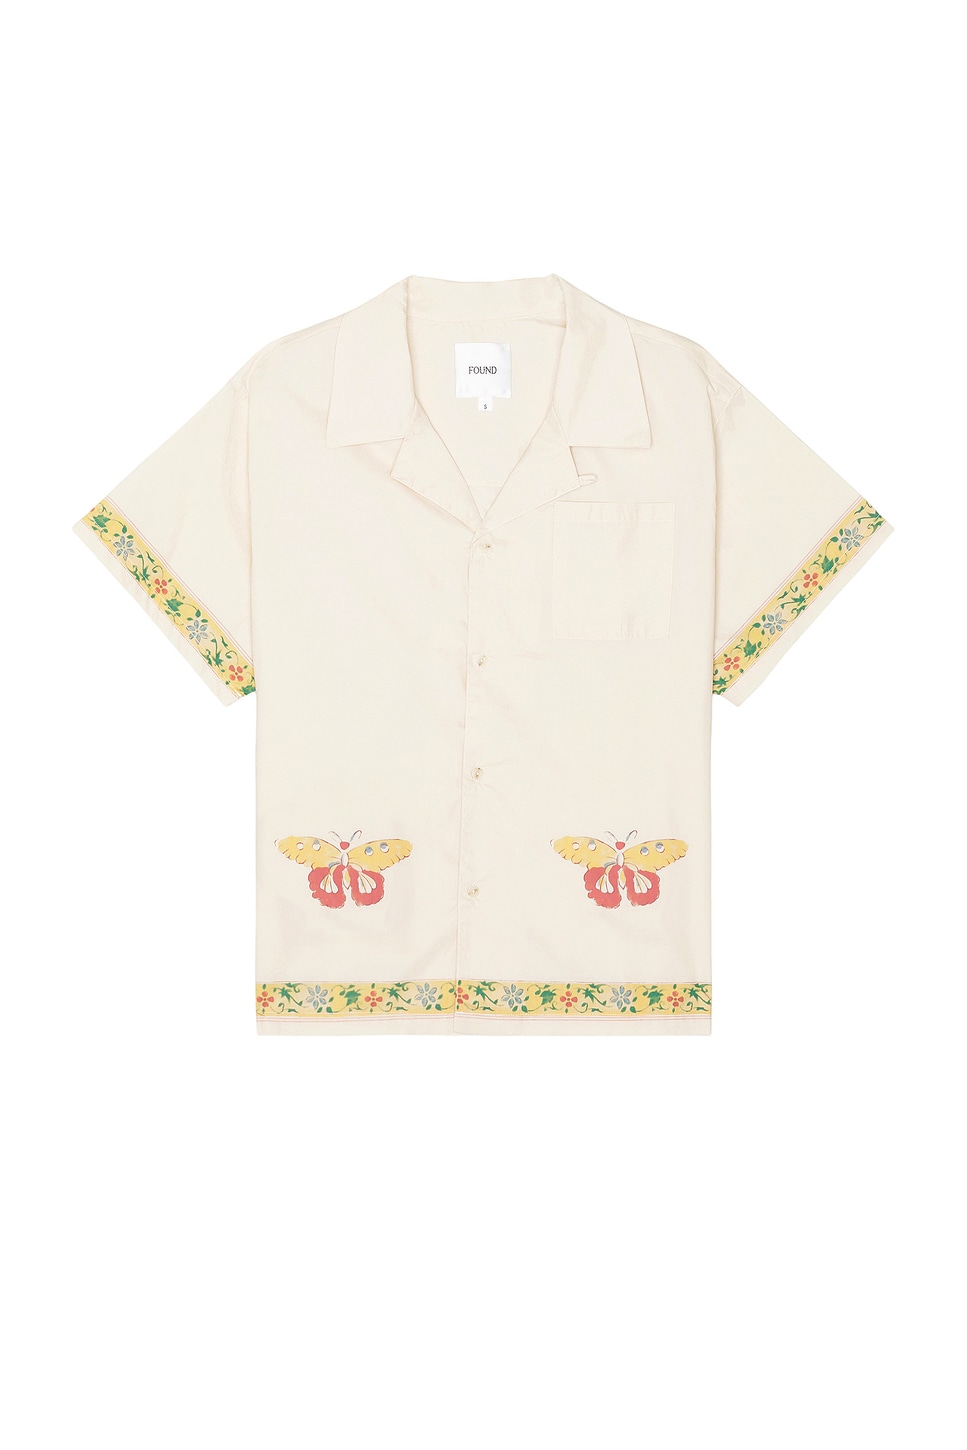 Image 1 of Found Moth Short Sleeve Camp Shirt in Cream